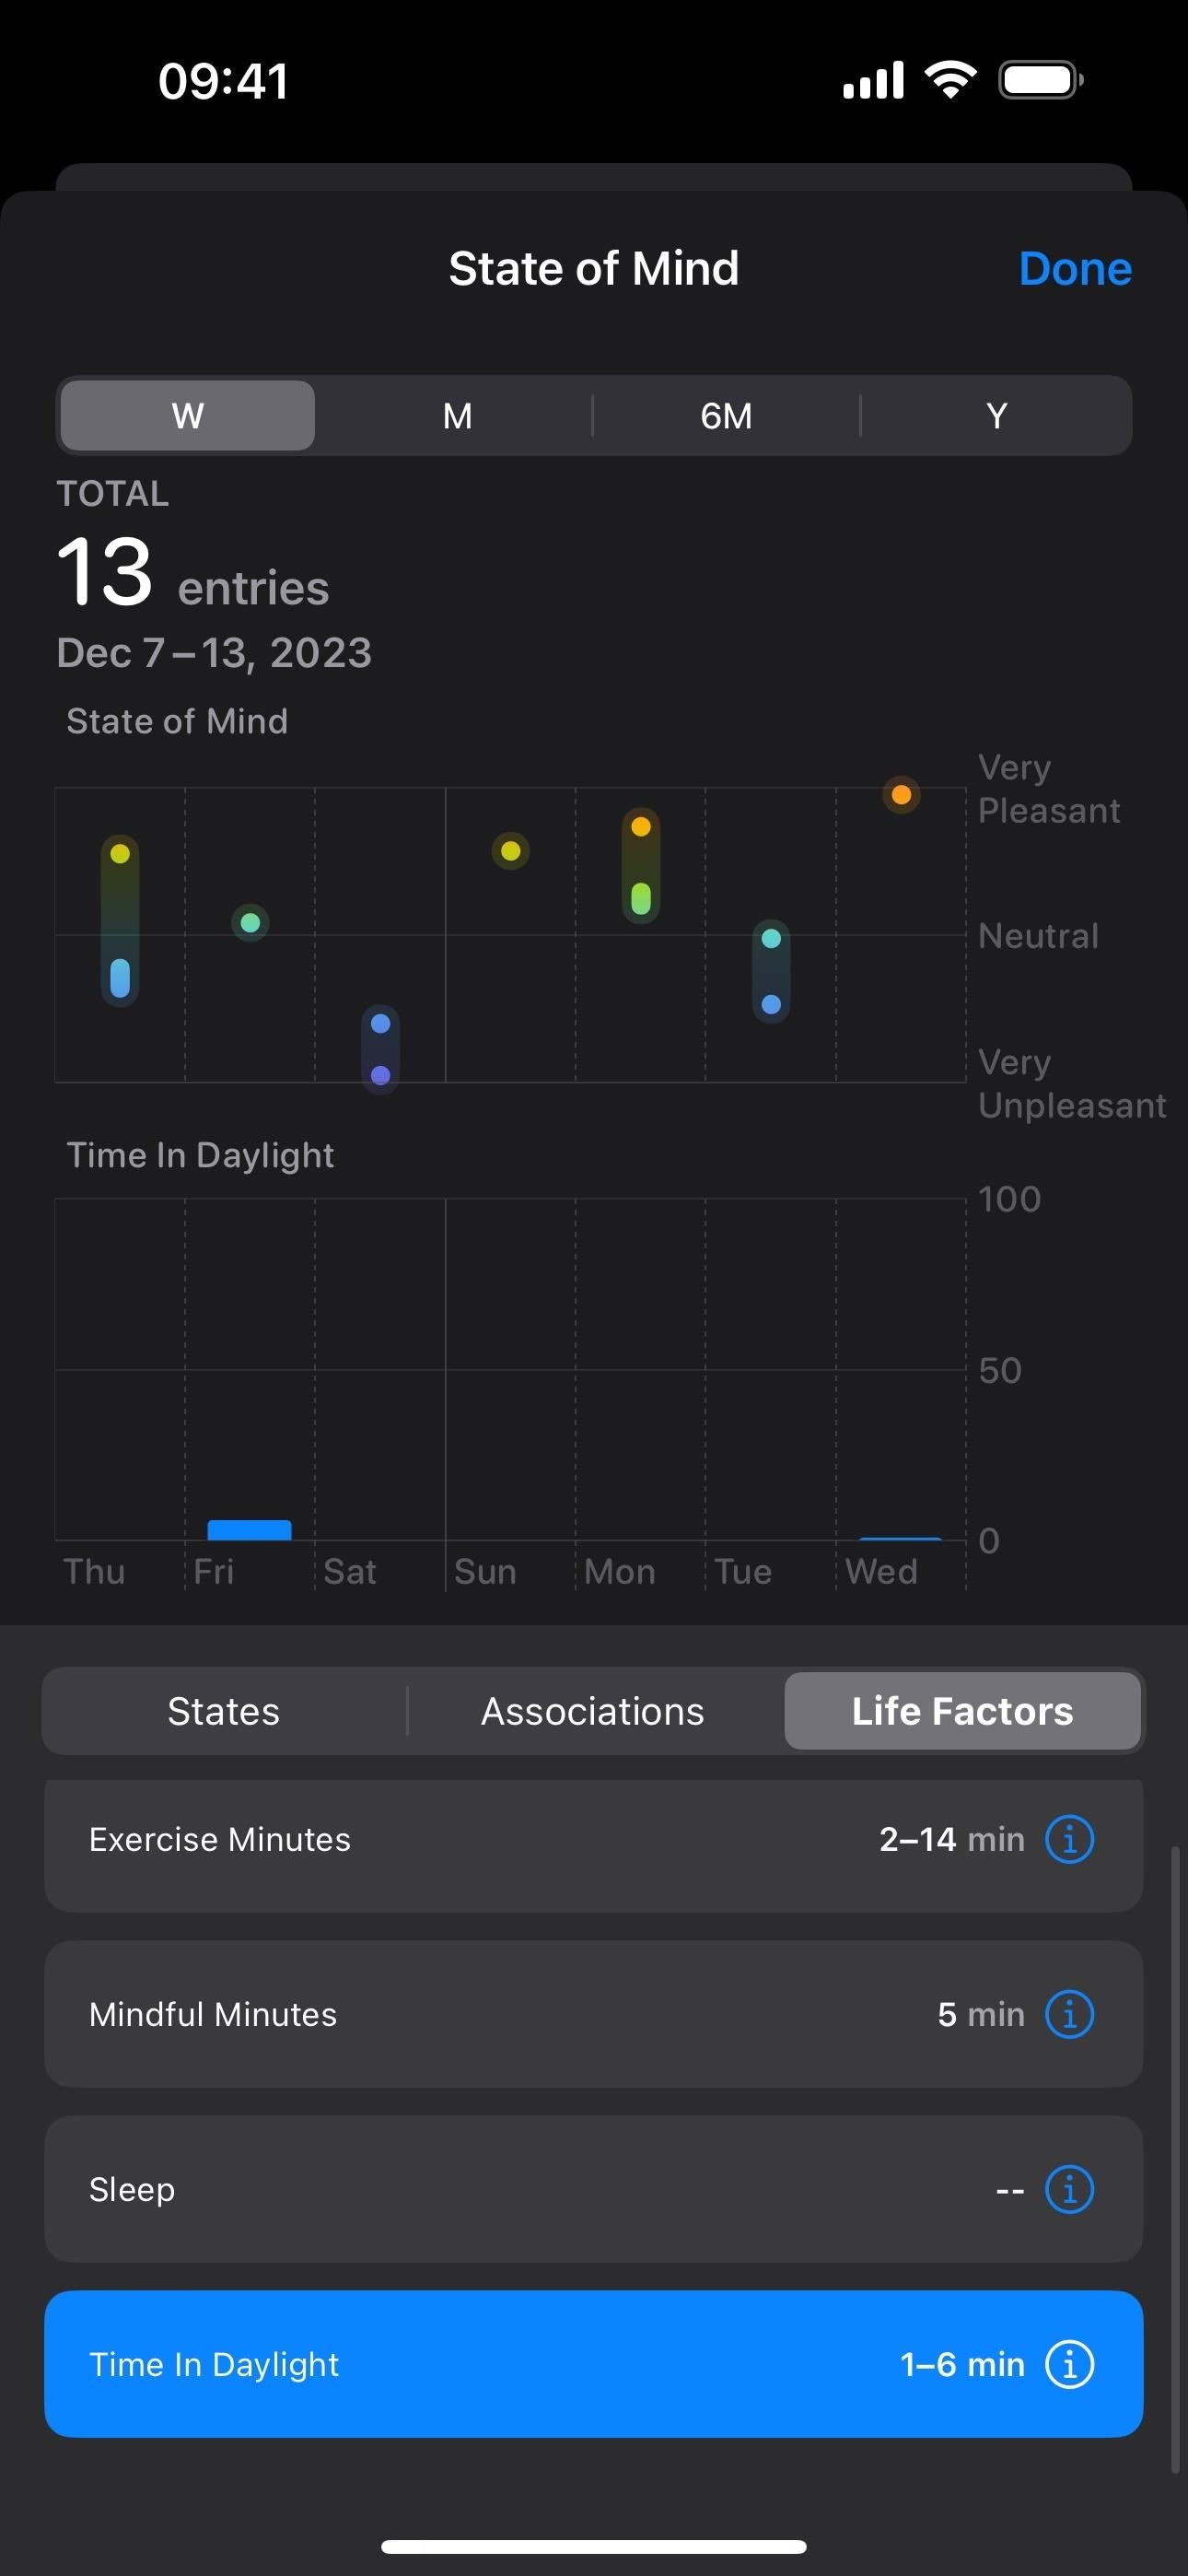 Your iPhone Can Help You Track and Analyze Your Emotions and Overall Mood Over Time — Here's How